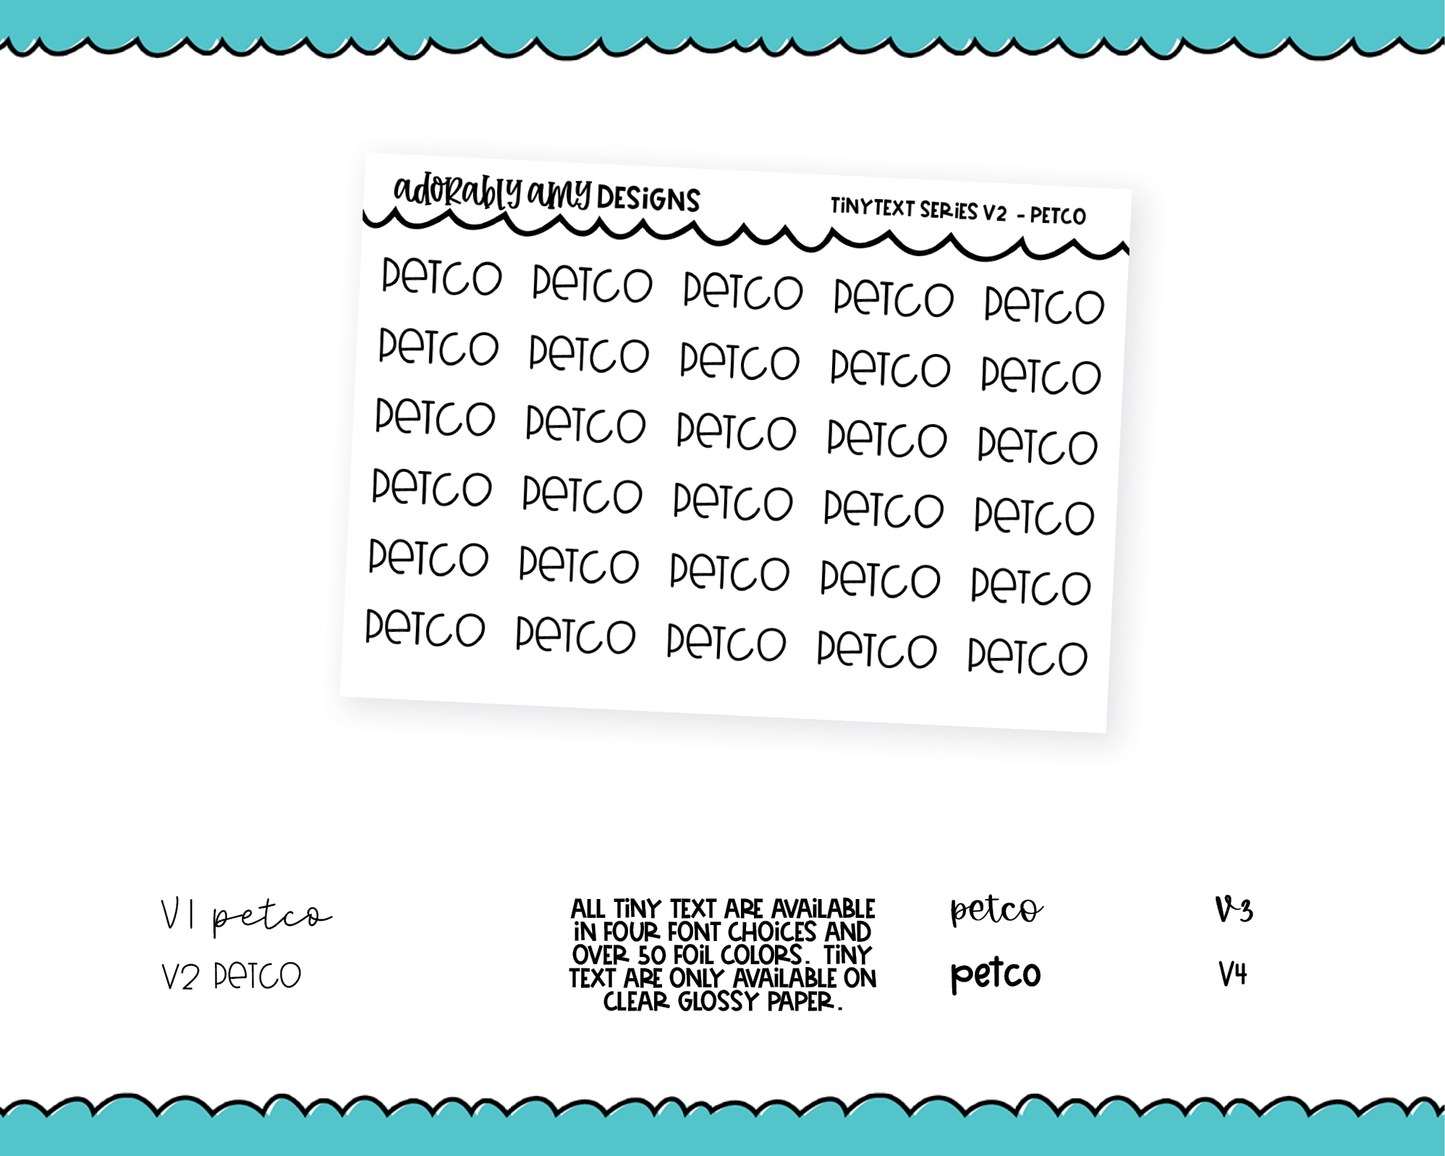 Foiled Tiny Text Series - Petco Checklist Size Planner Stickers for any Planner or Insert